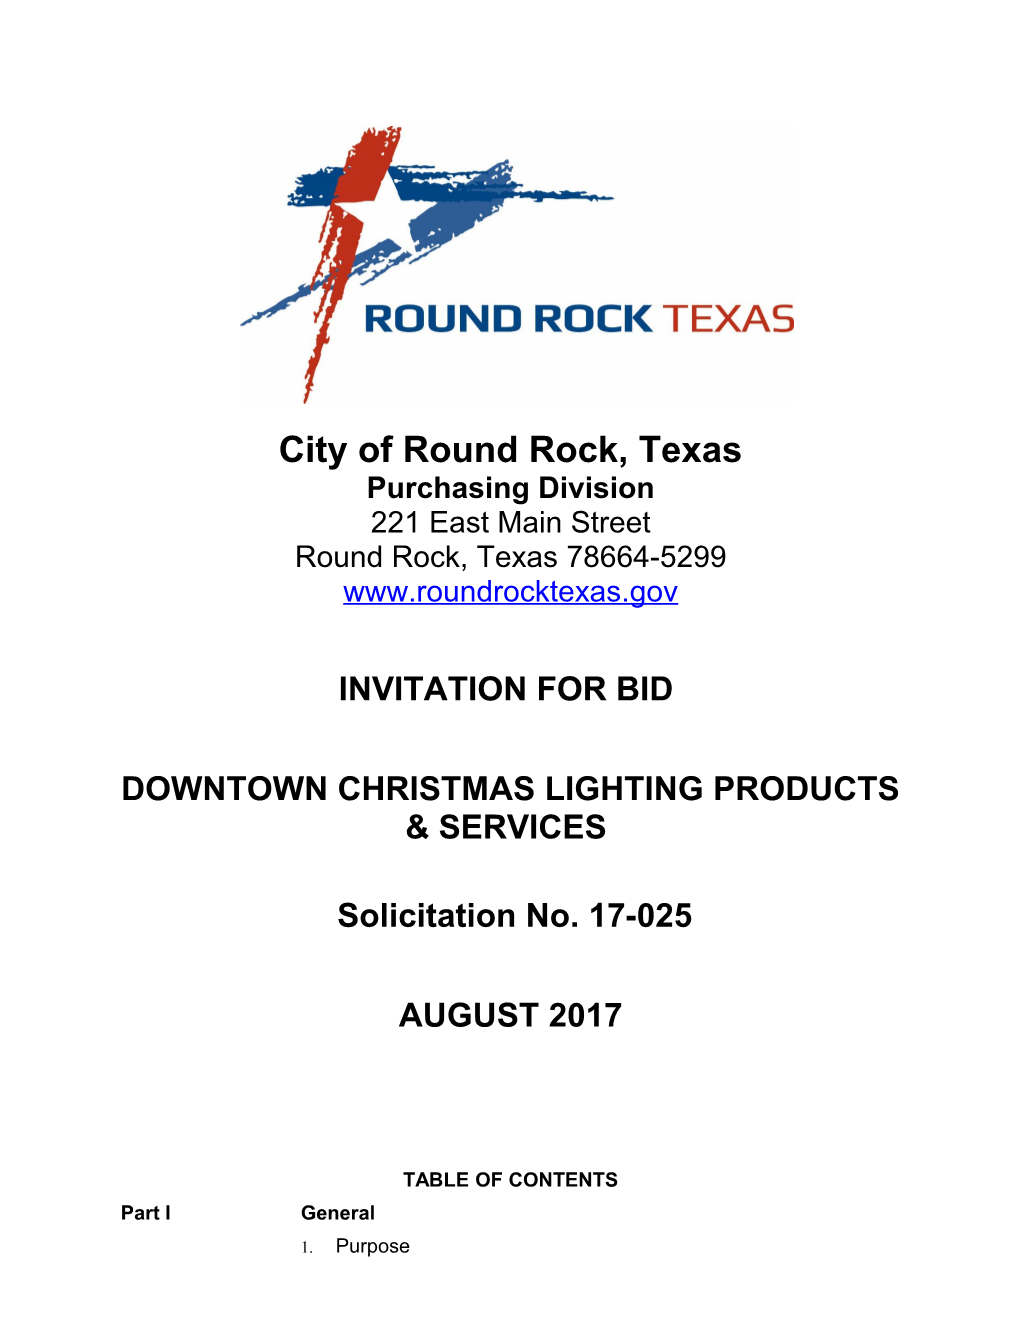 Downtown Christmas Lighting Products and Services